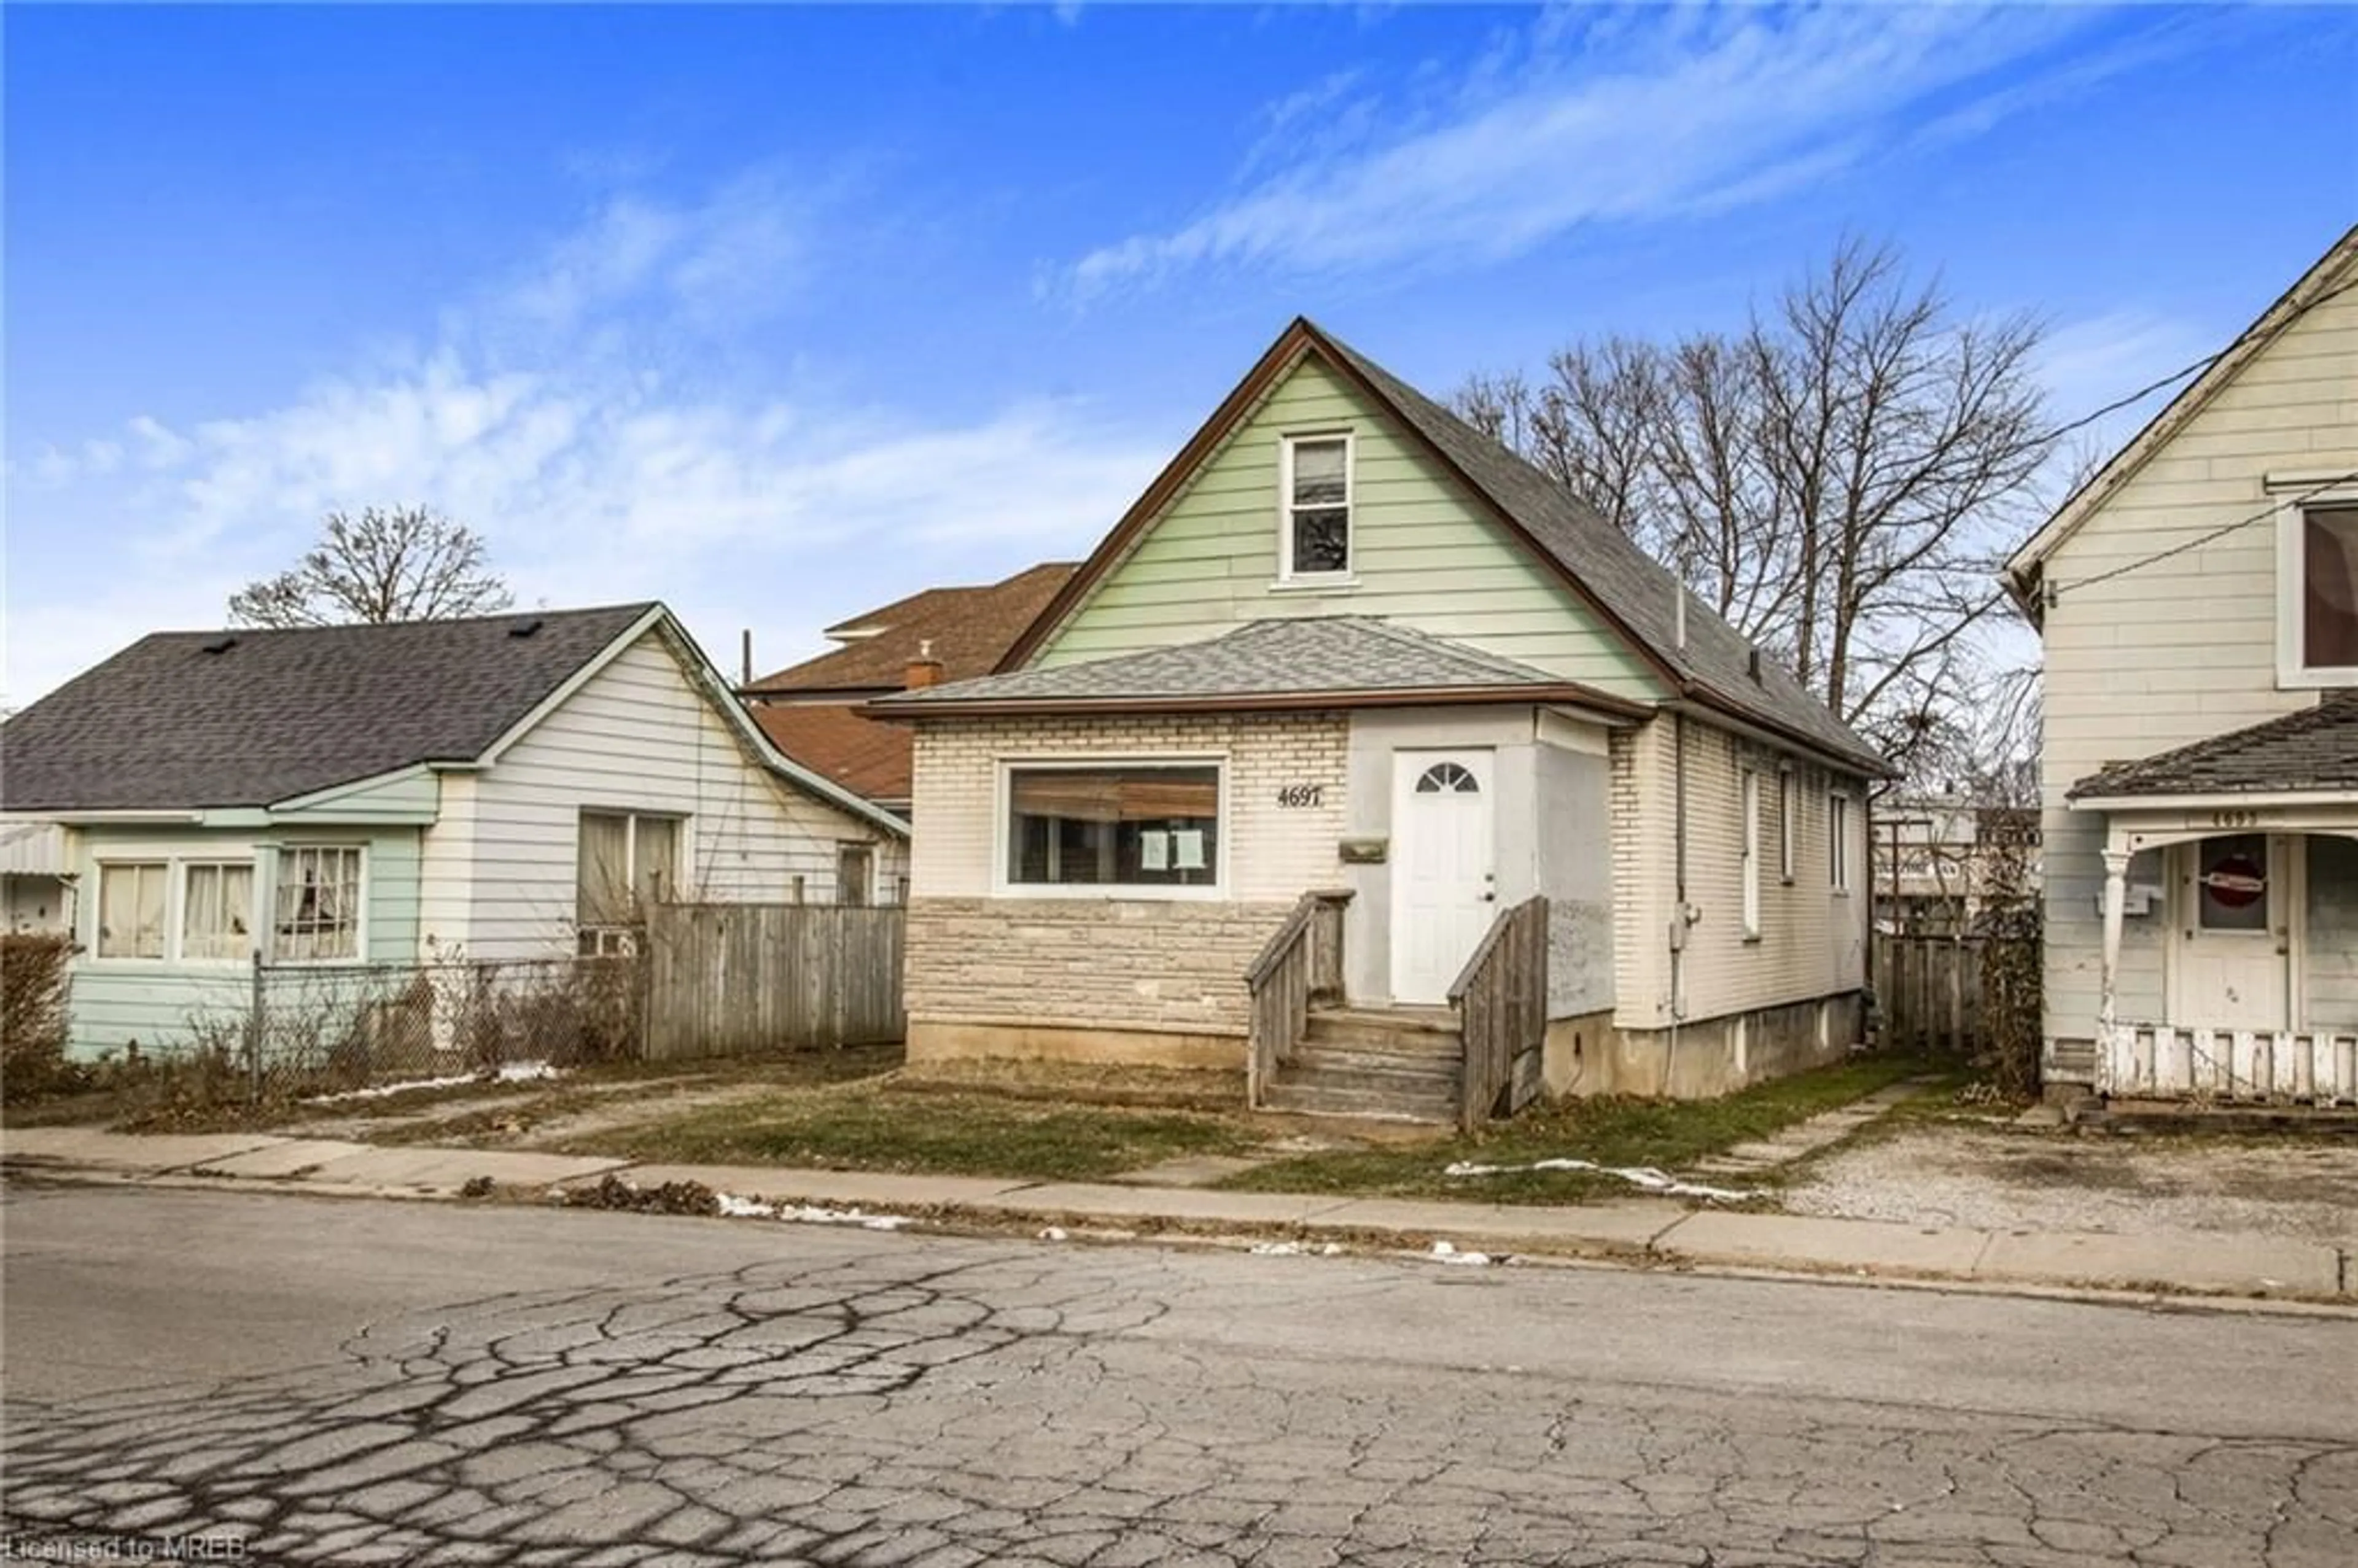 Frontside or backside of a home for 4697 Huron St, Niagara Falls Ontario L2E 2H7